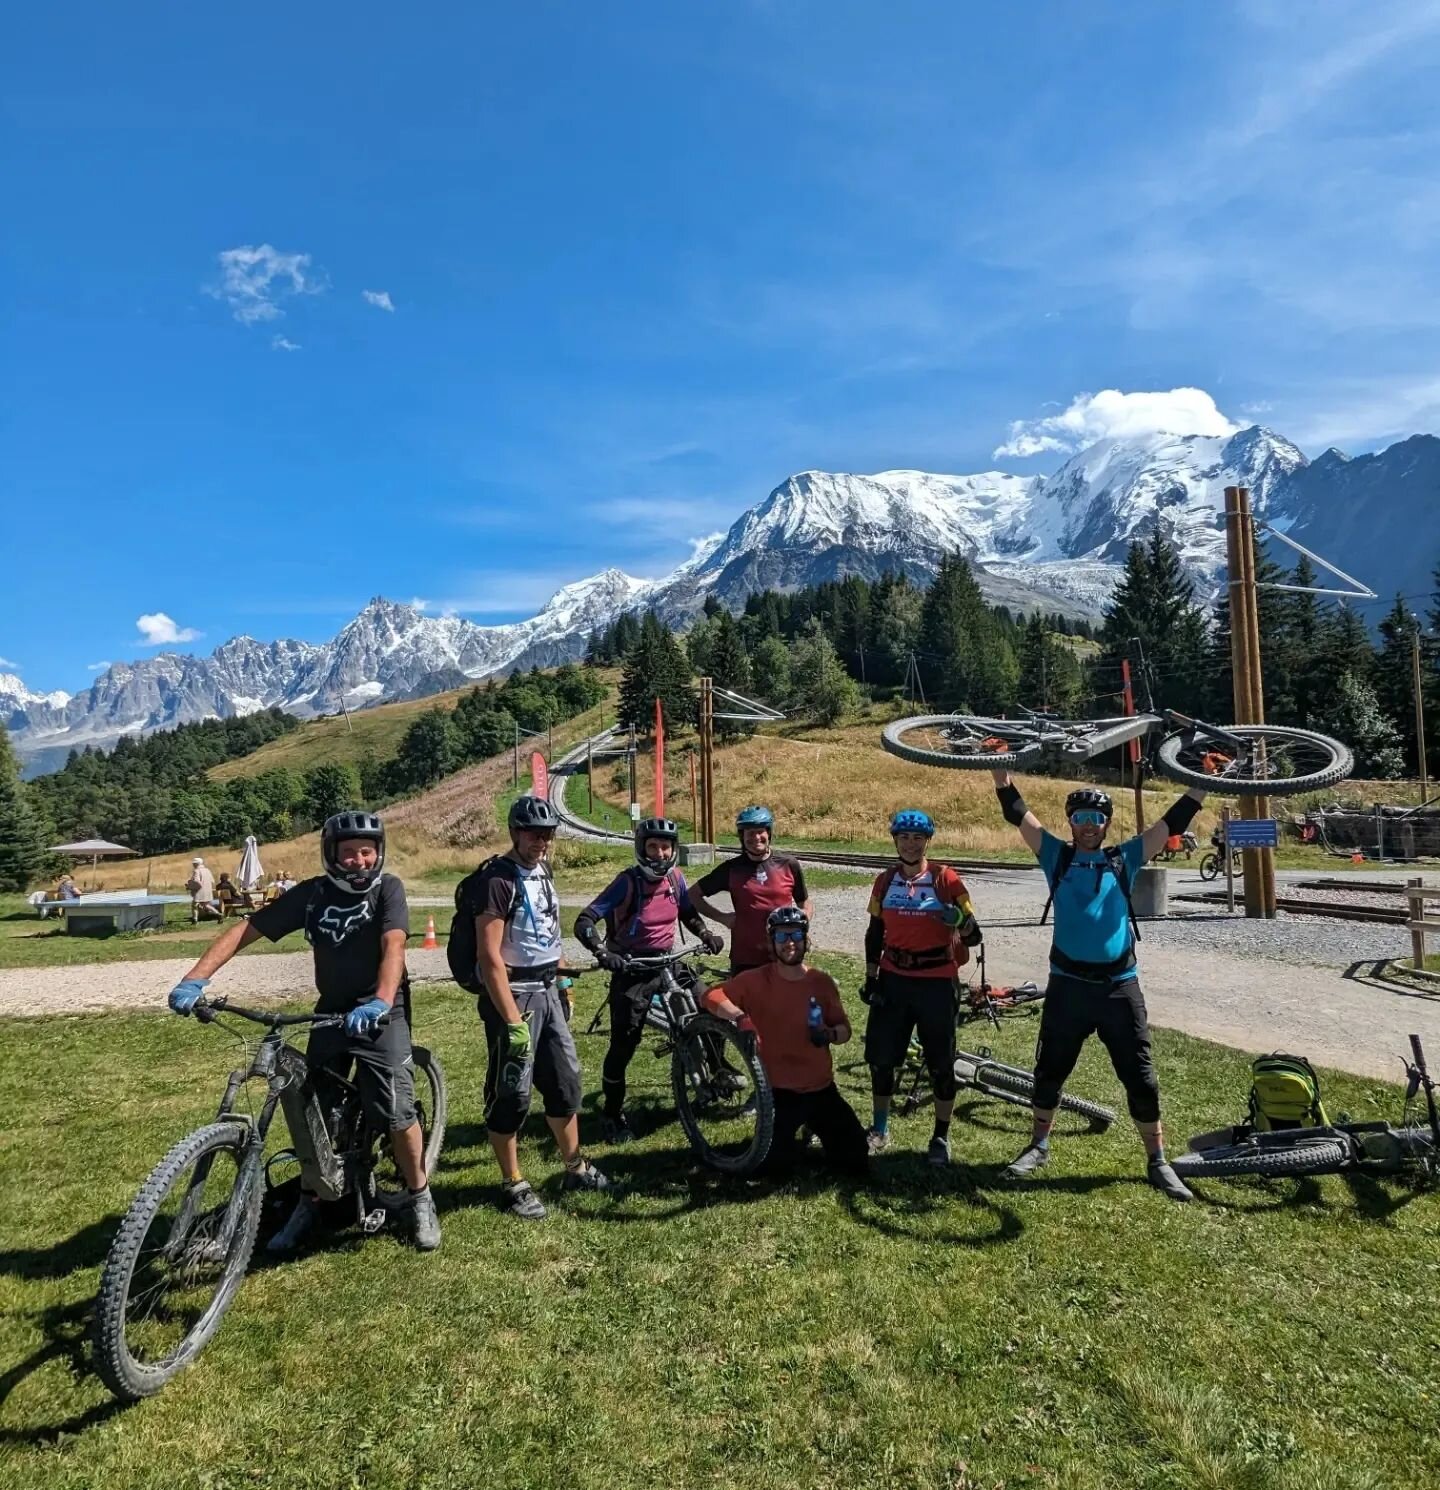 ⚡E Bikers!⚡
We ran our first Mont Blanc Enduro E-bike tour this summer, and despite the weather throwing us some random curveballs (snow in August anyone?!😂), we had a great week.

We're excited to be running TWO weeks for E-bikers next summer, both